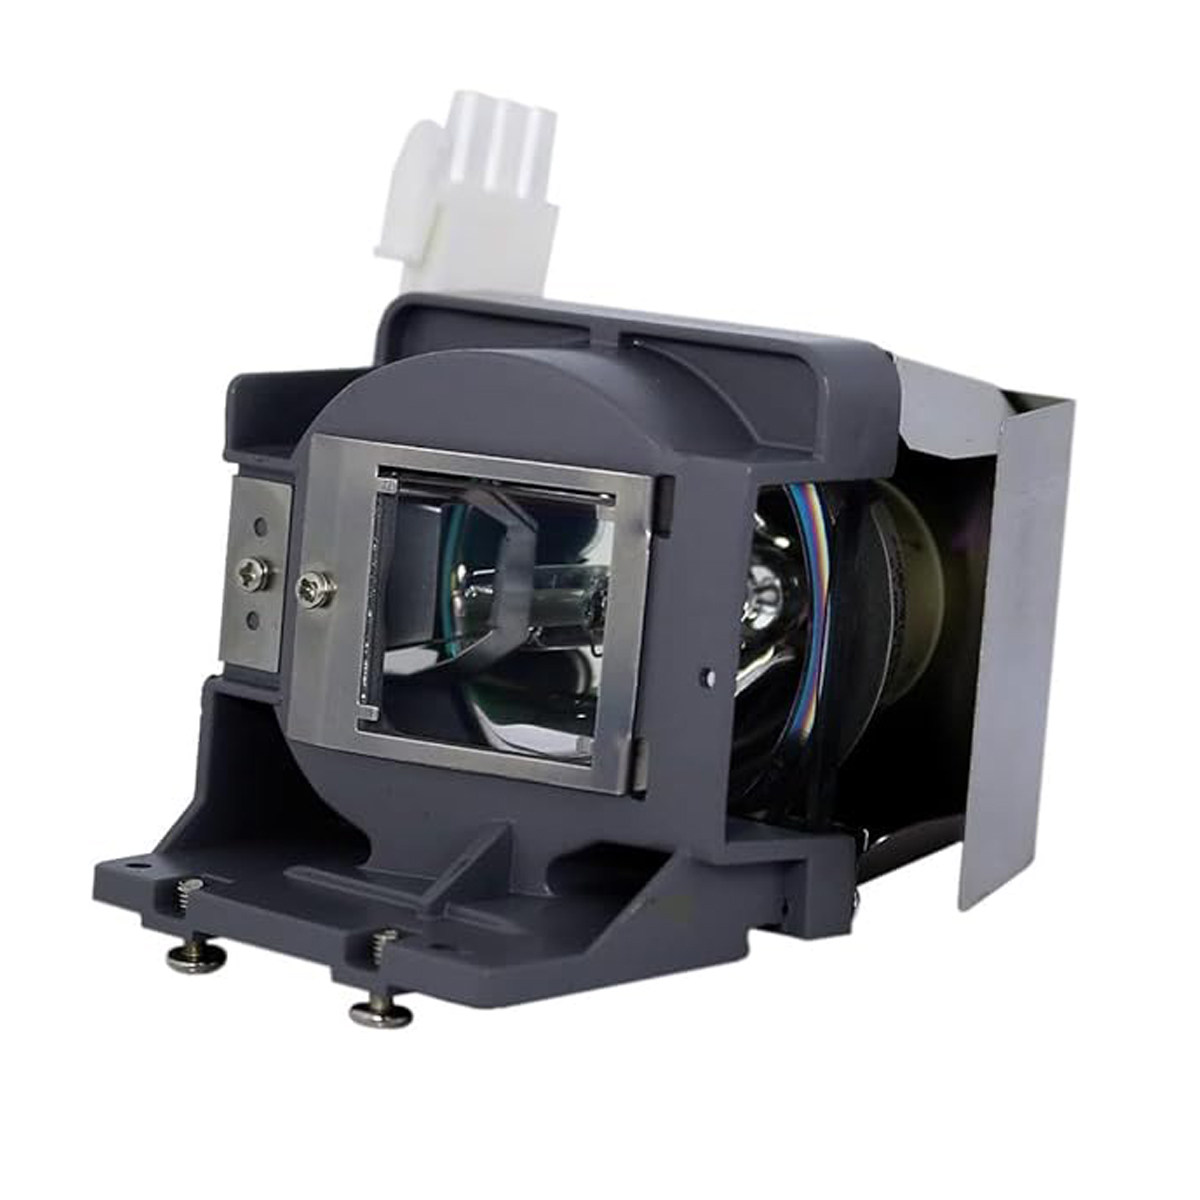 Replacement Projector lamp RLC-096 For VIEWSONIC PJD6355 PJD7325 PJD7525W